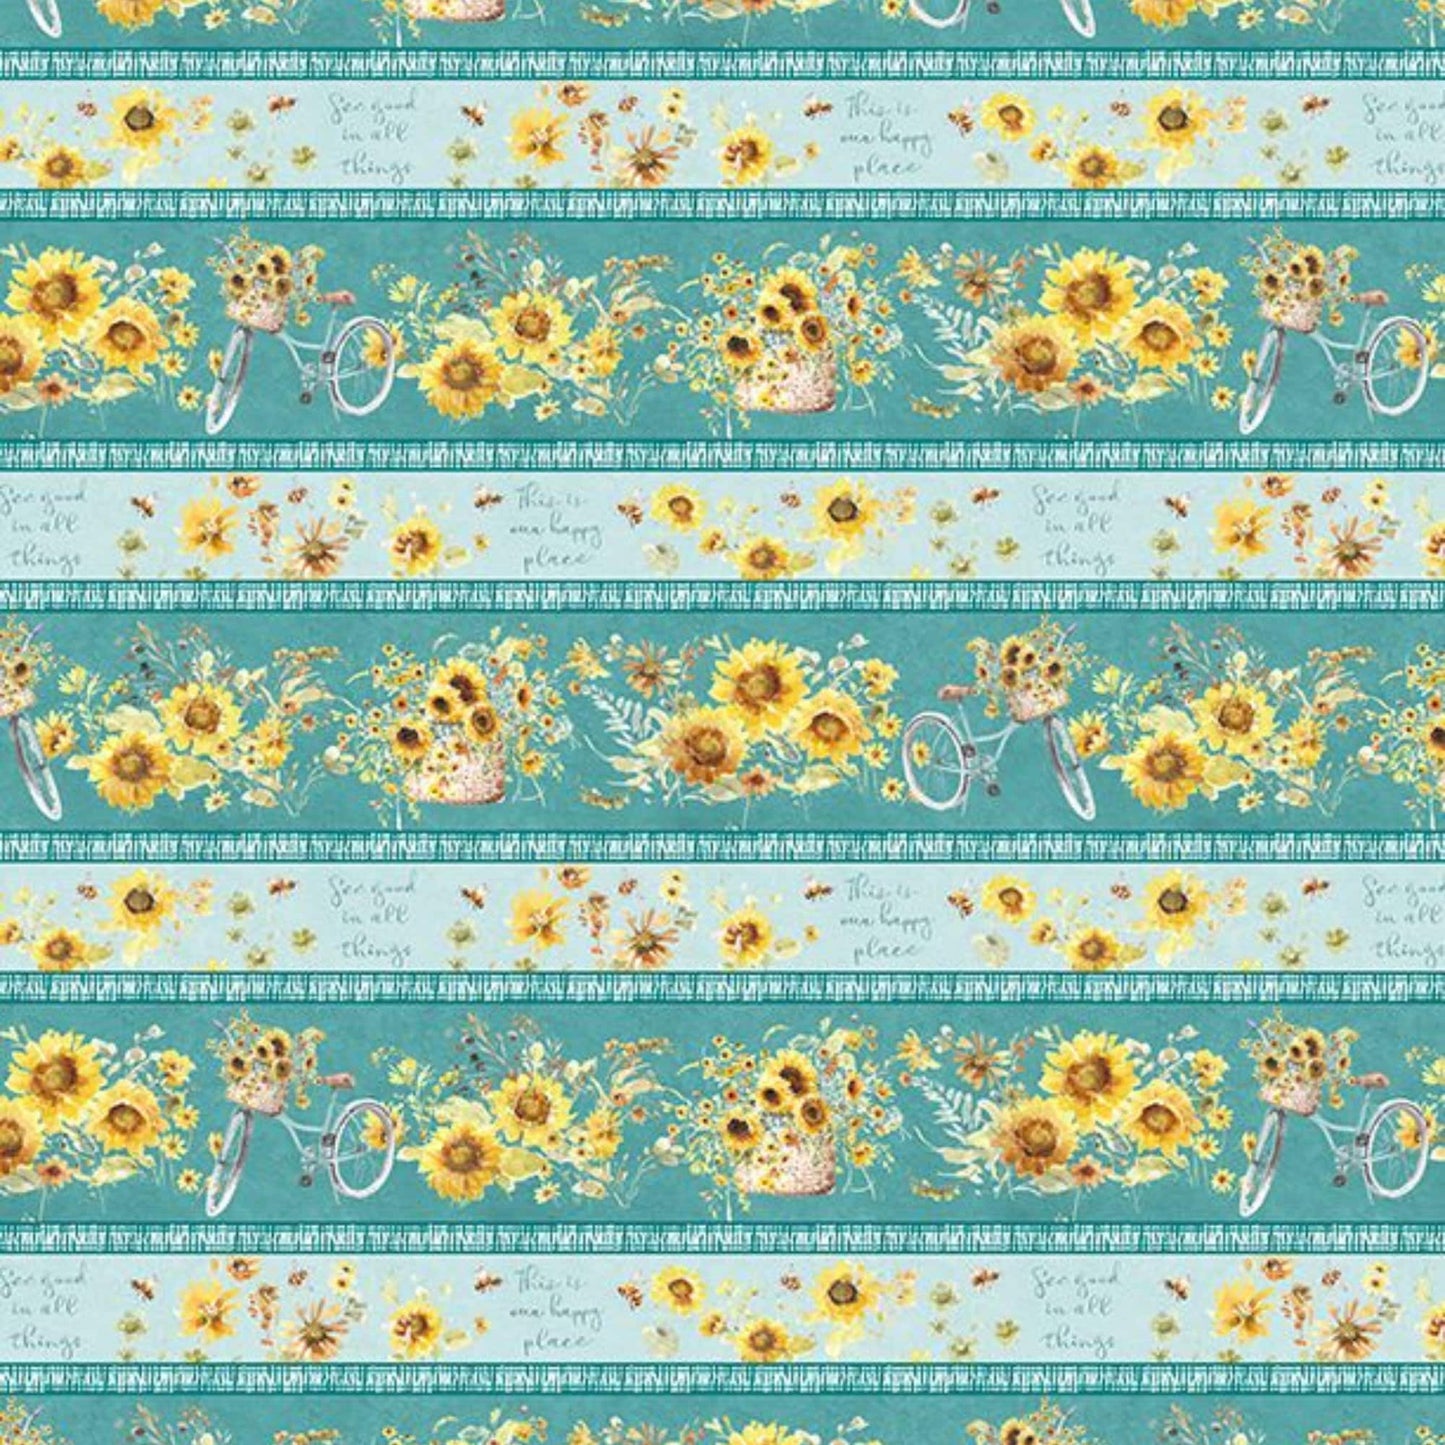 Wilmington Prints Repeating Stripe / FQ (18"x21") Light Teal Gingham, Leaf Texture Teal or Repeating Stripe Fabric by the Yard from Wilmington Prints Sunflower Sweet by Lisa Audit